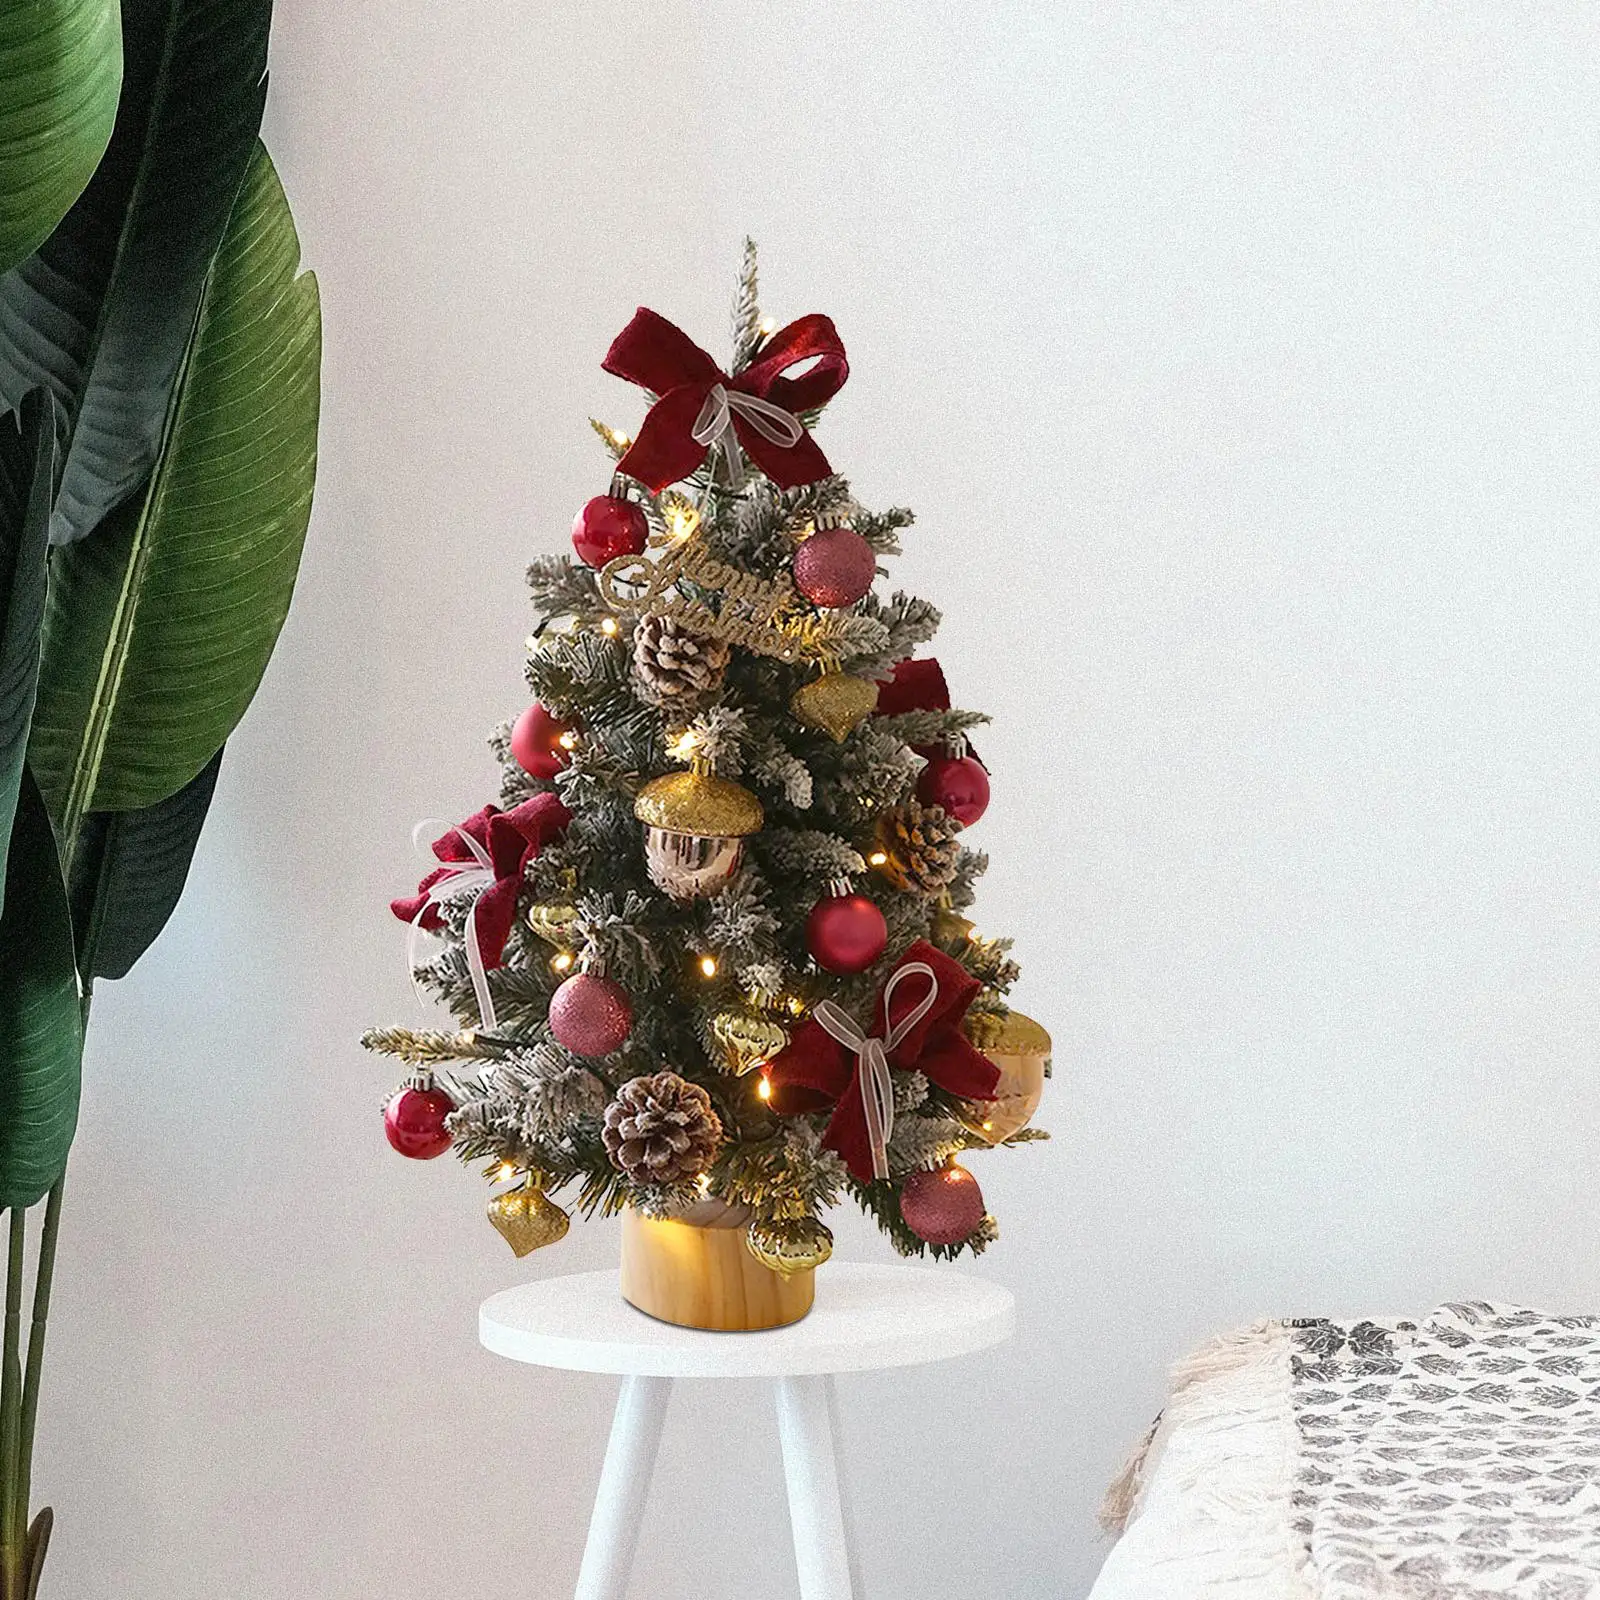 Artificial Christmas Tree with Lights Small Xmas Tree for Living Room Table Holiday Bedroom Fireplace